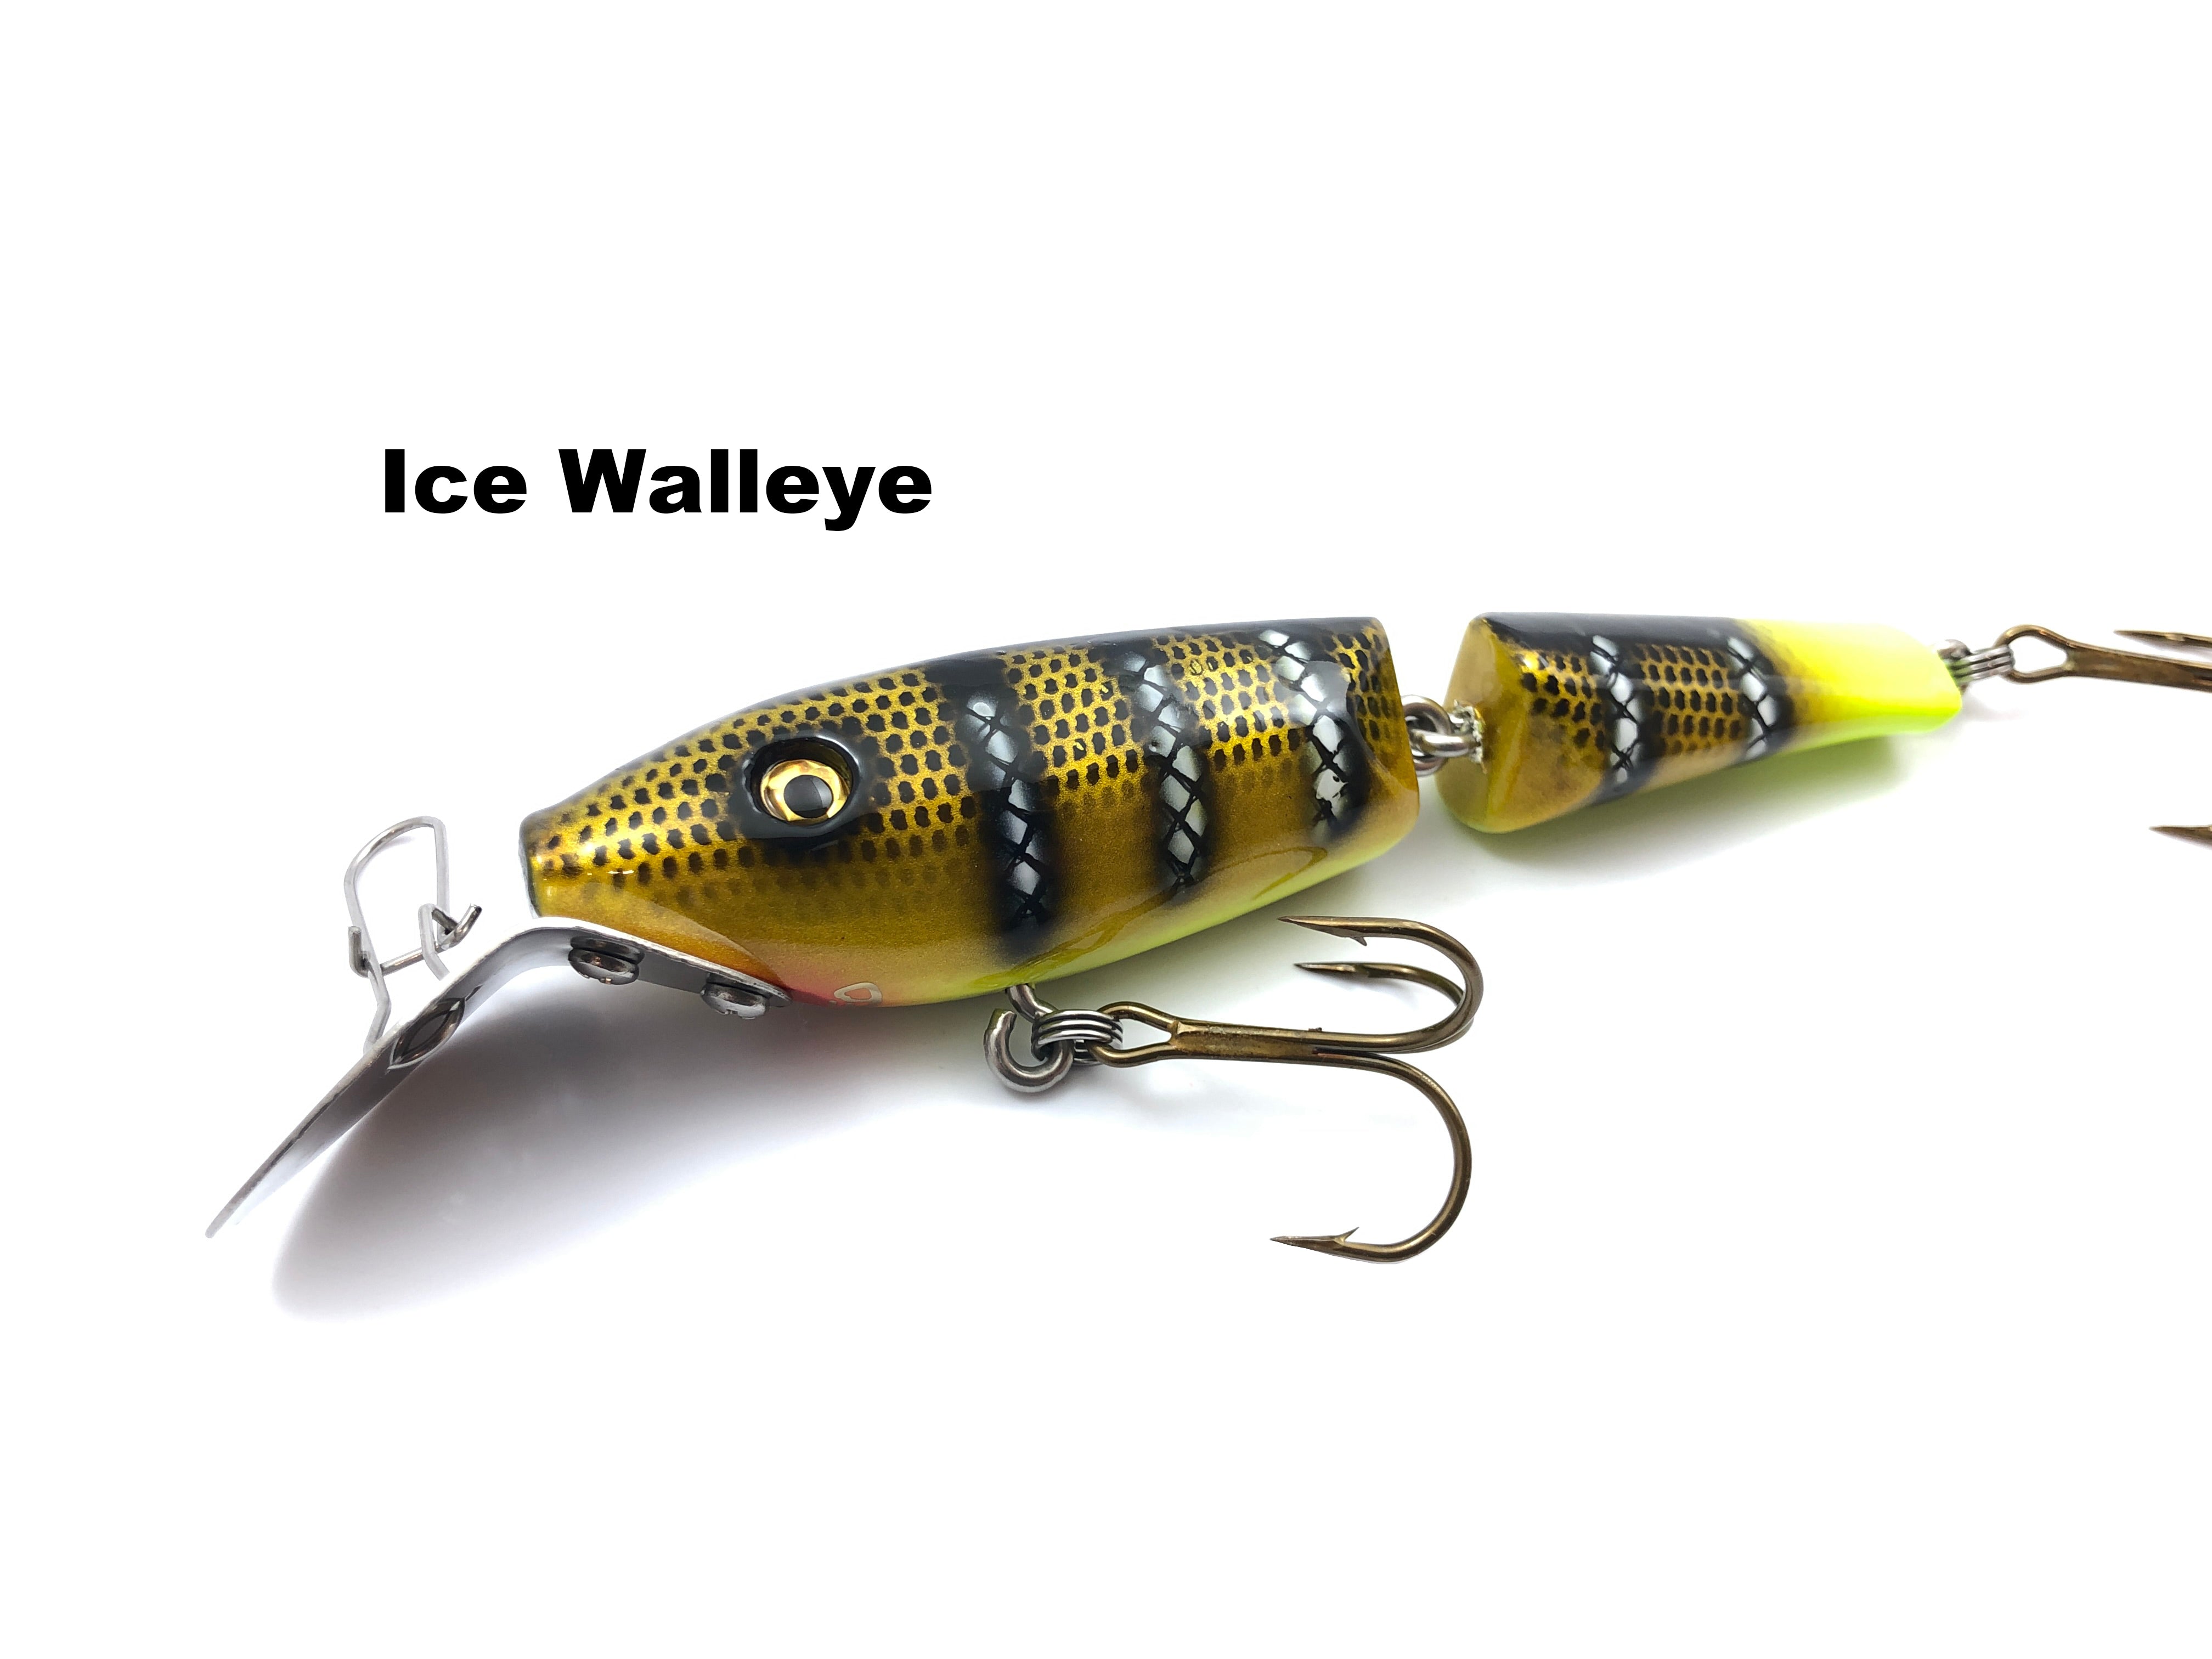 Leo Lure-Shayla Shad-Jointed 5.25 Color Ocean PerchLEO LURES-SHAYLA SHAD  JOINTED5 1/4 inches lengthThe Shayla SHAD has a lifelike fish-shaped body.  Great for casting or trolling. This shallow running lure will be ideal